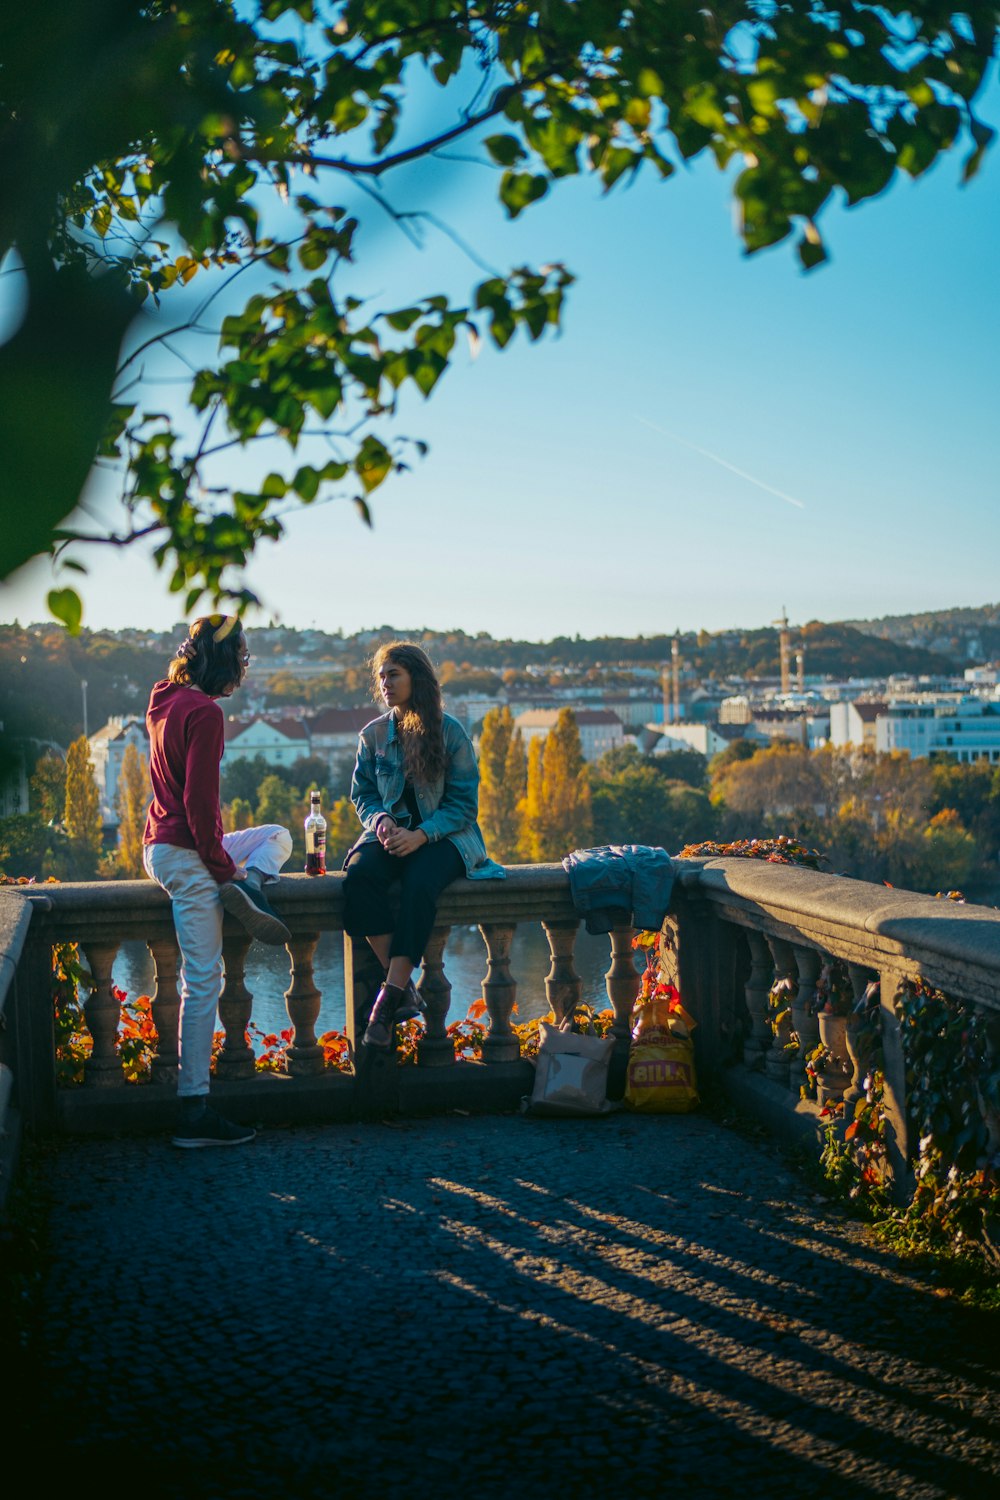 a couple of women sitting on a bench overlooking a city